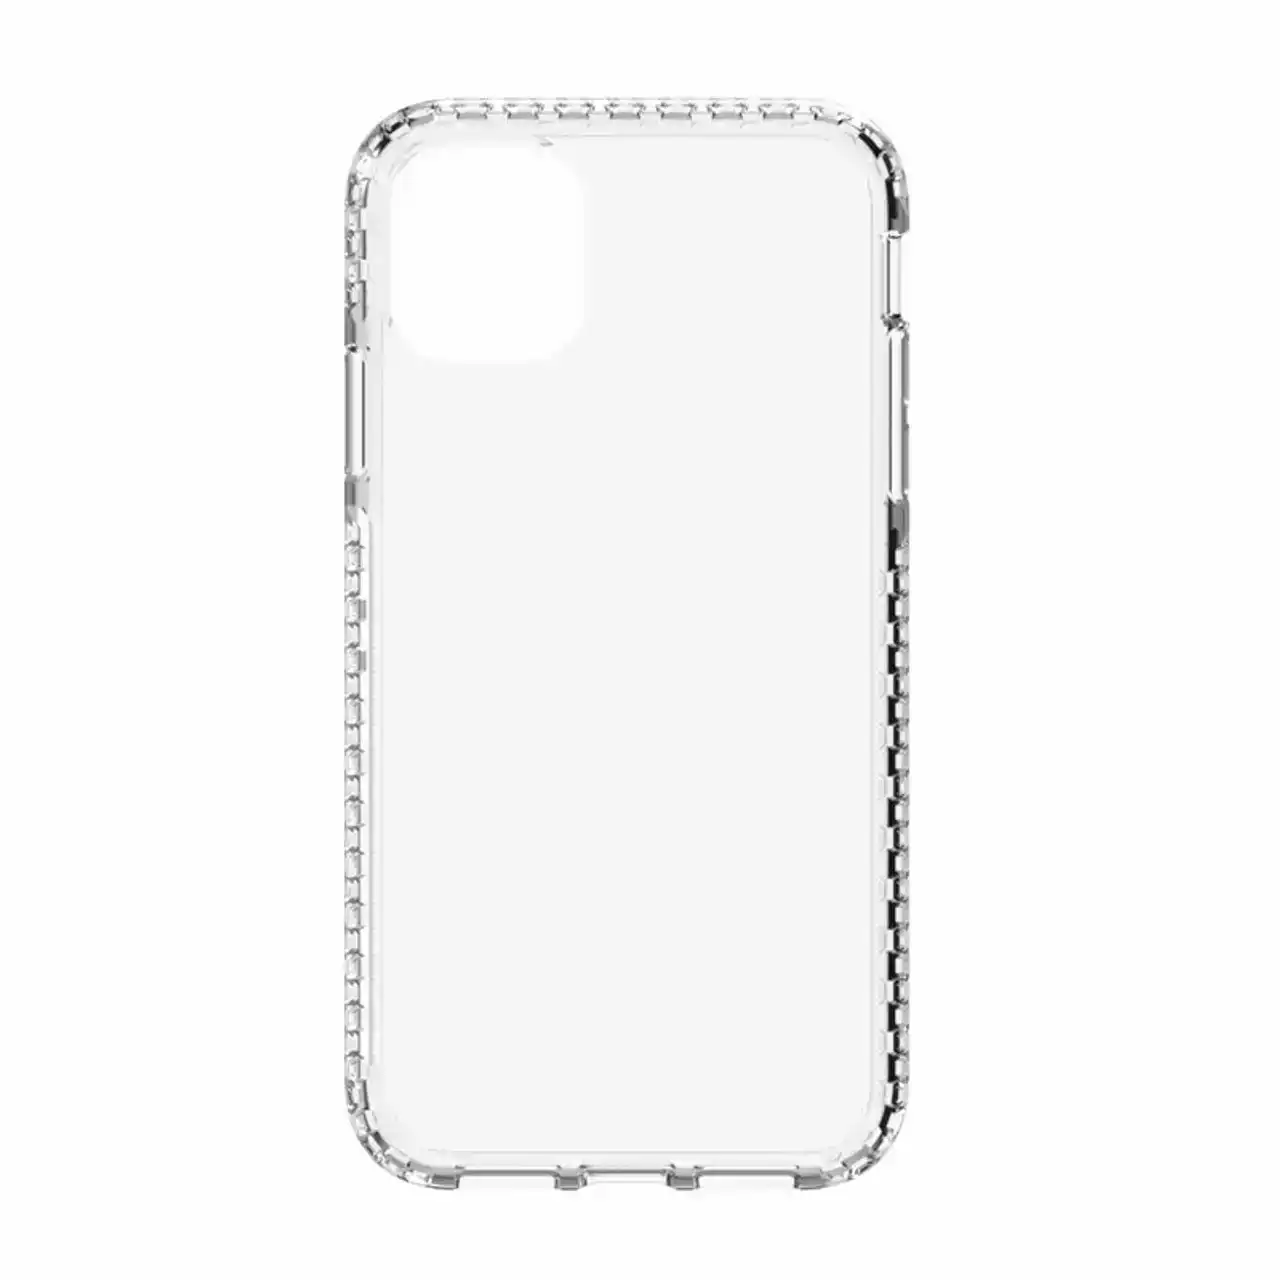 EFM Zurich Amour Case For Apple iPhone 11 Pro Max - Crystal Clear